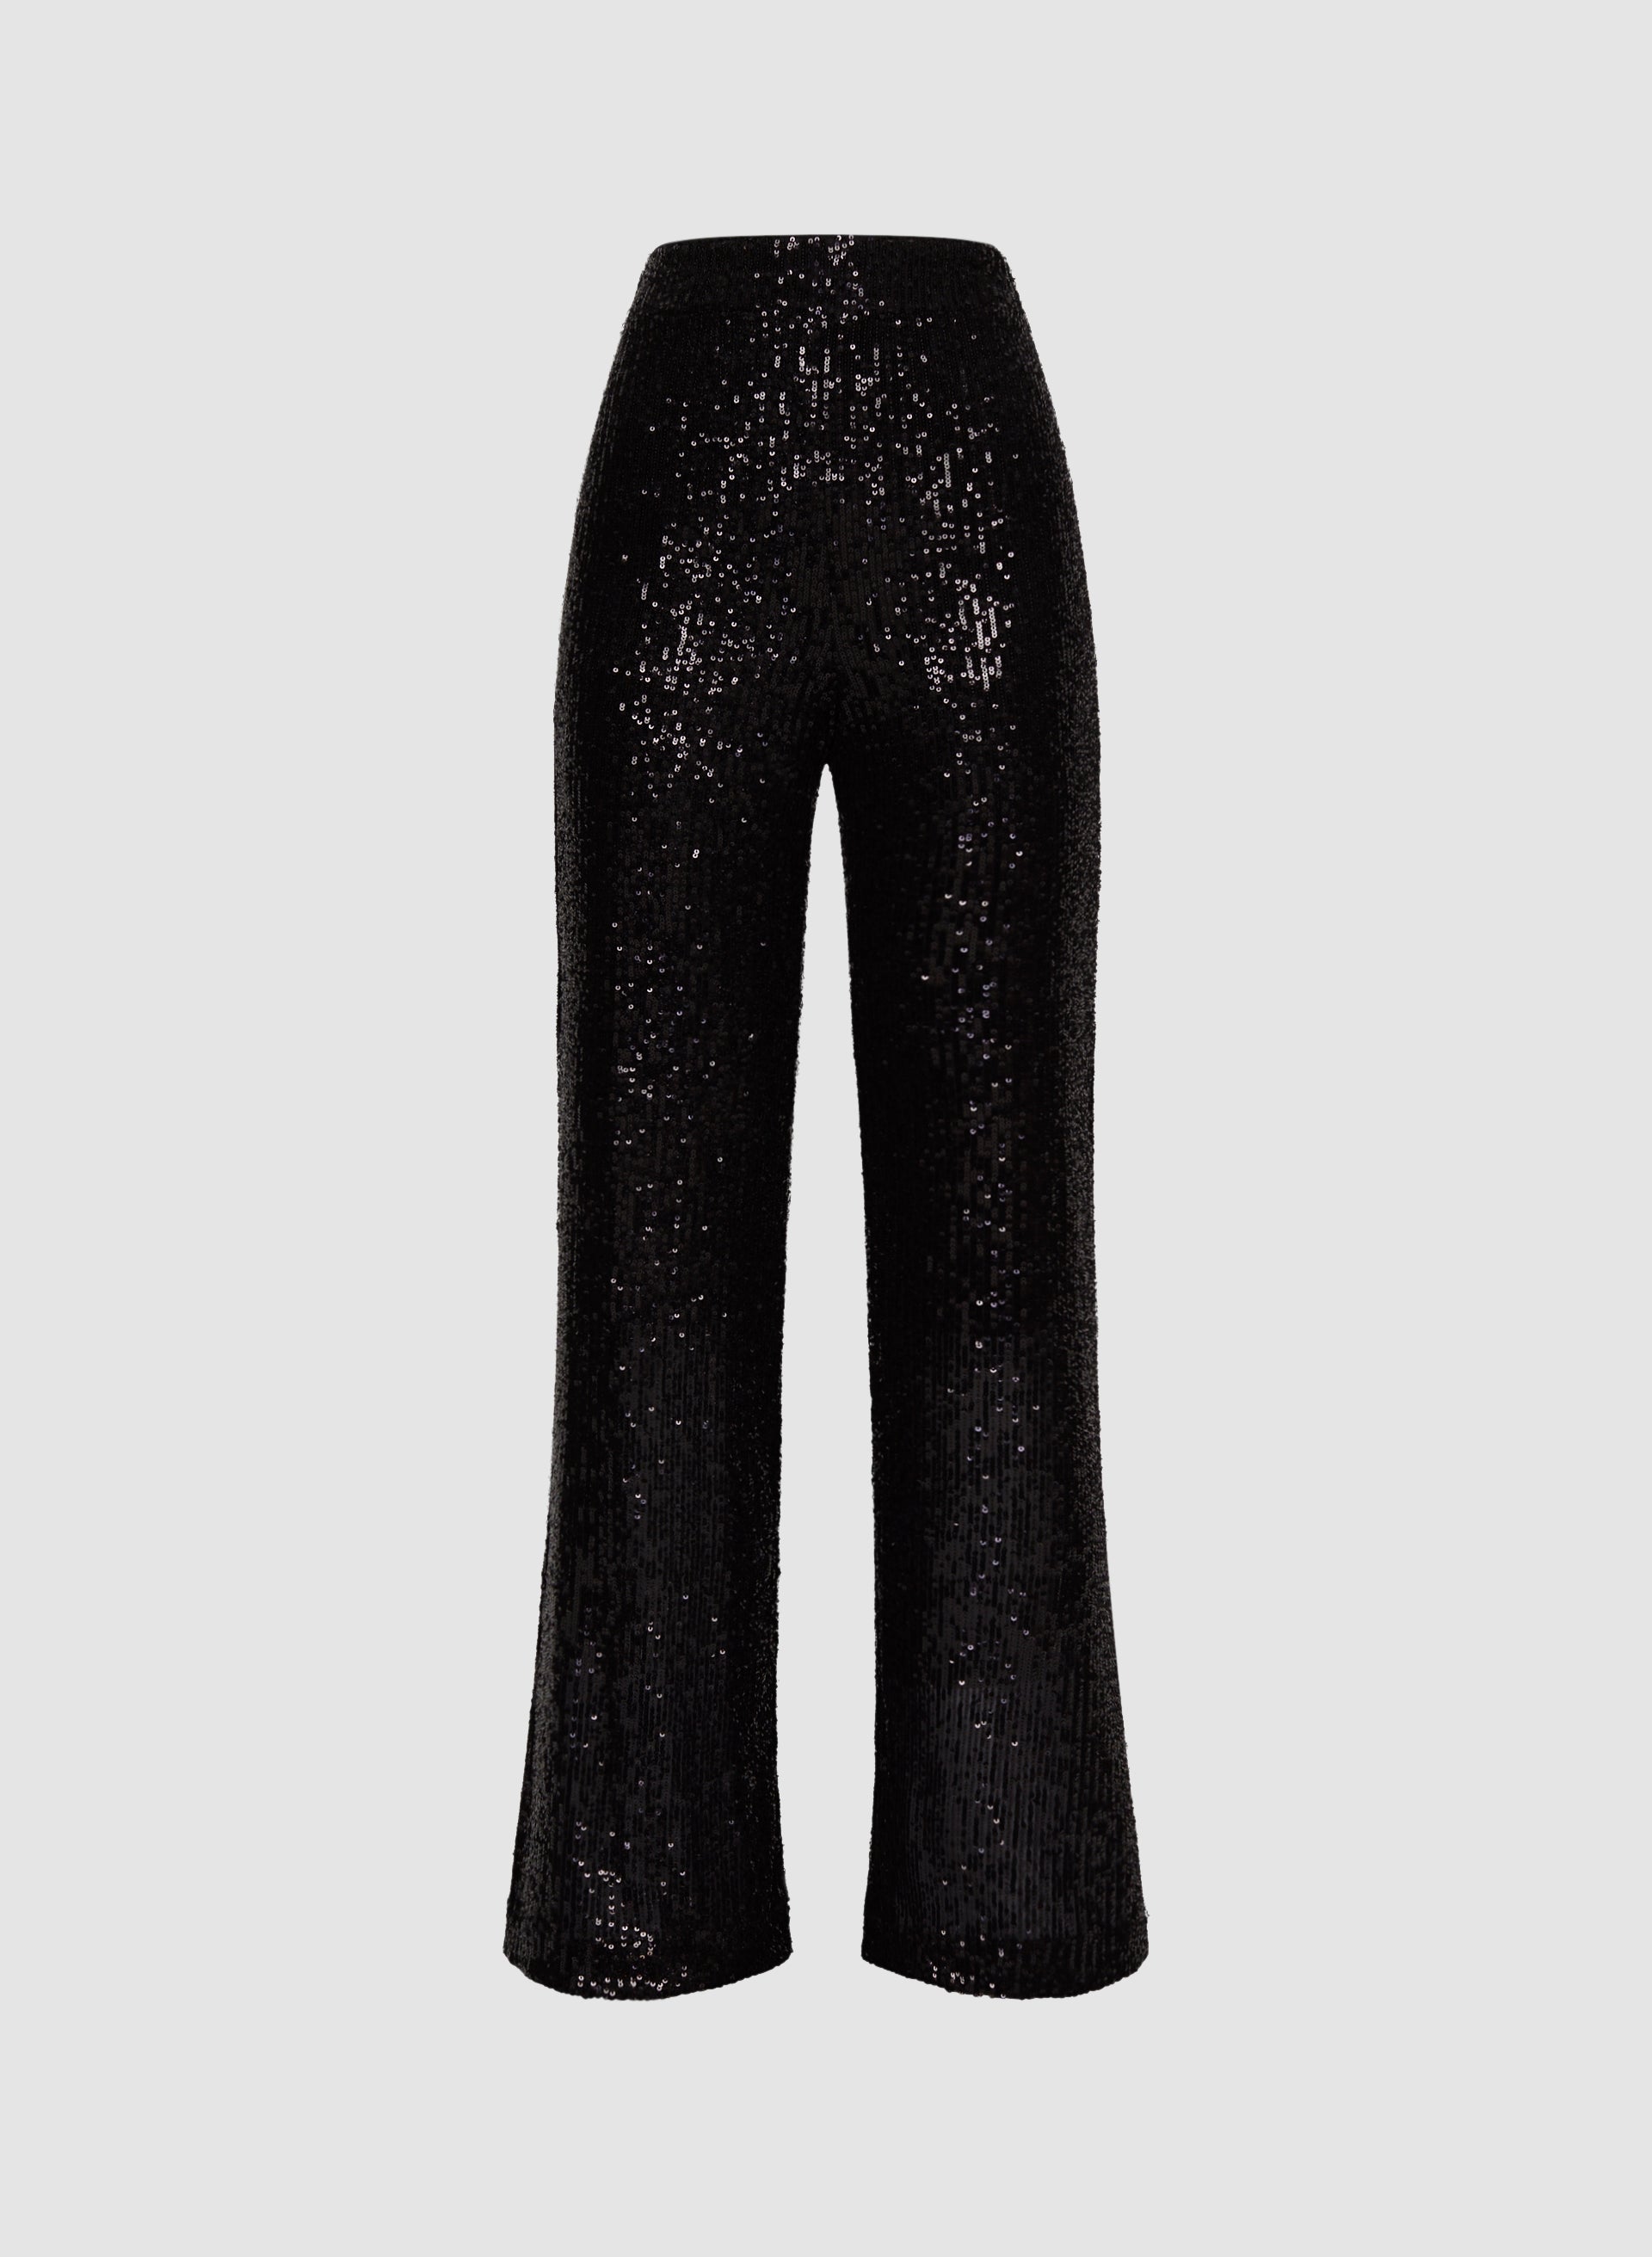 Pull-On Sequin Pants